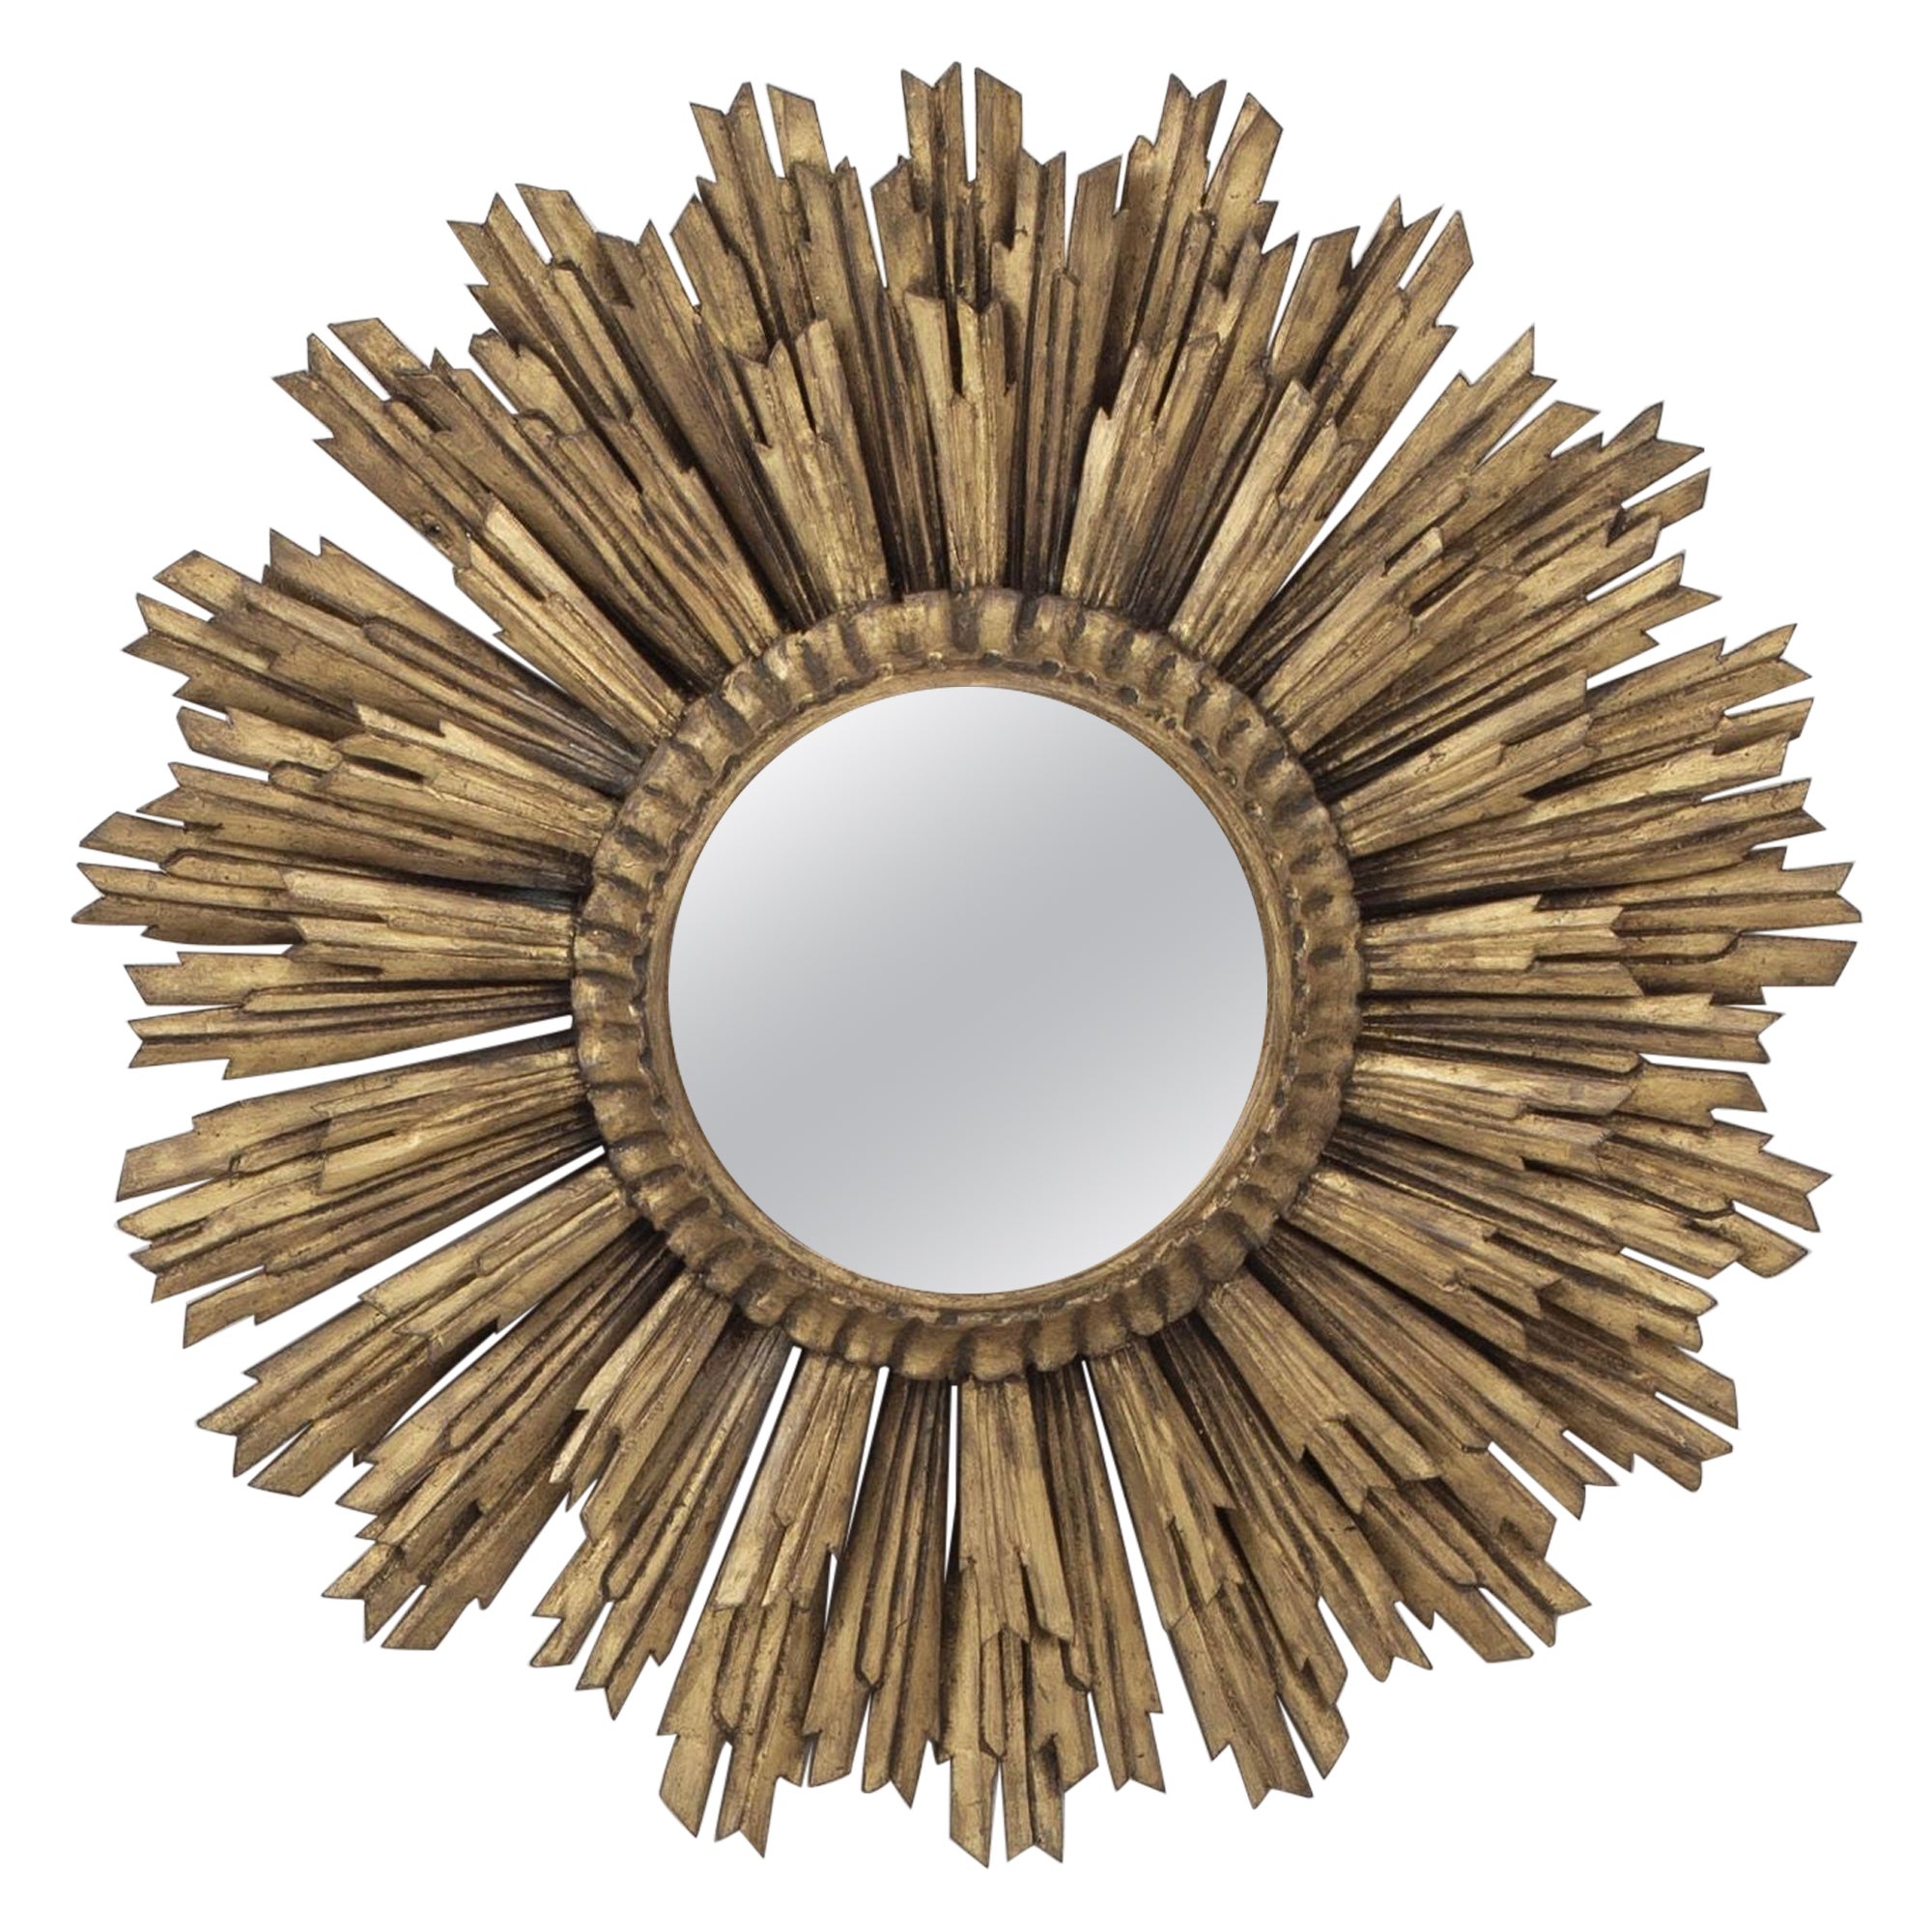 Large Early -Mid 20th c. French Art Deco Giltwood Sunburst Mirror For Sale